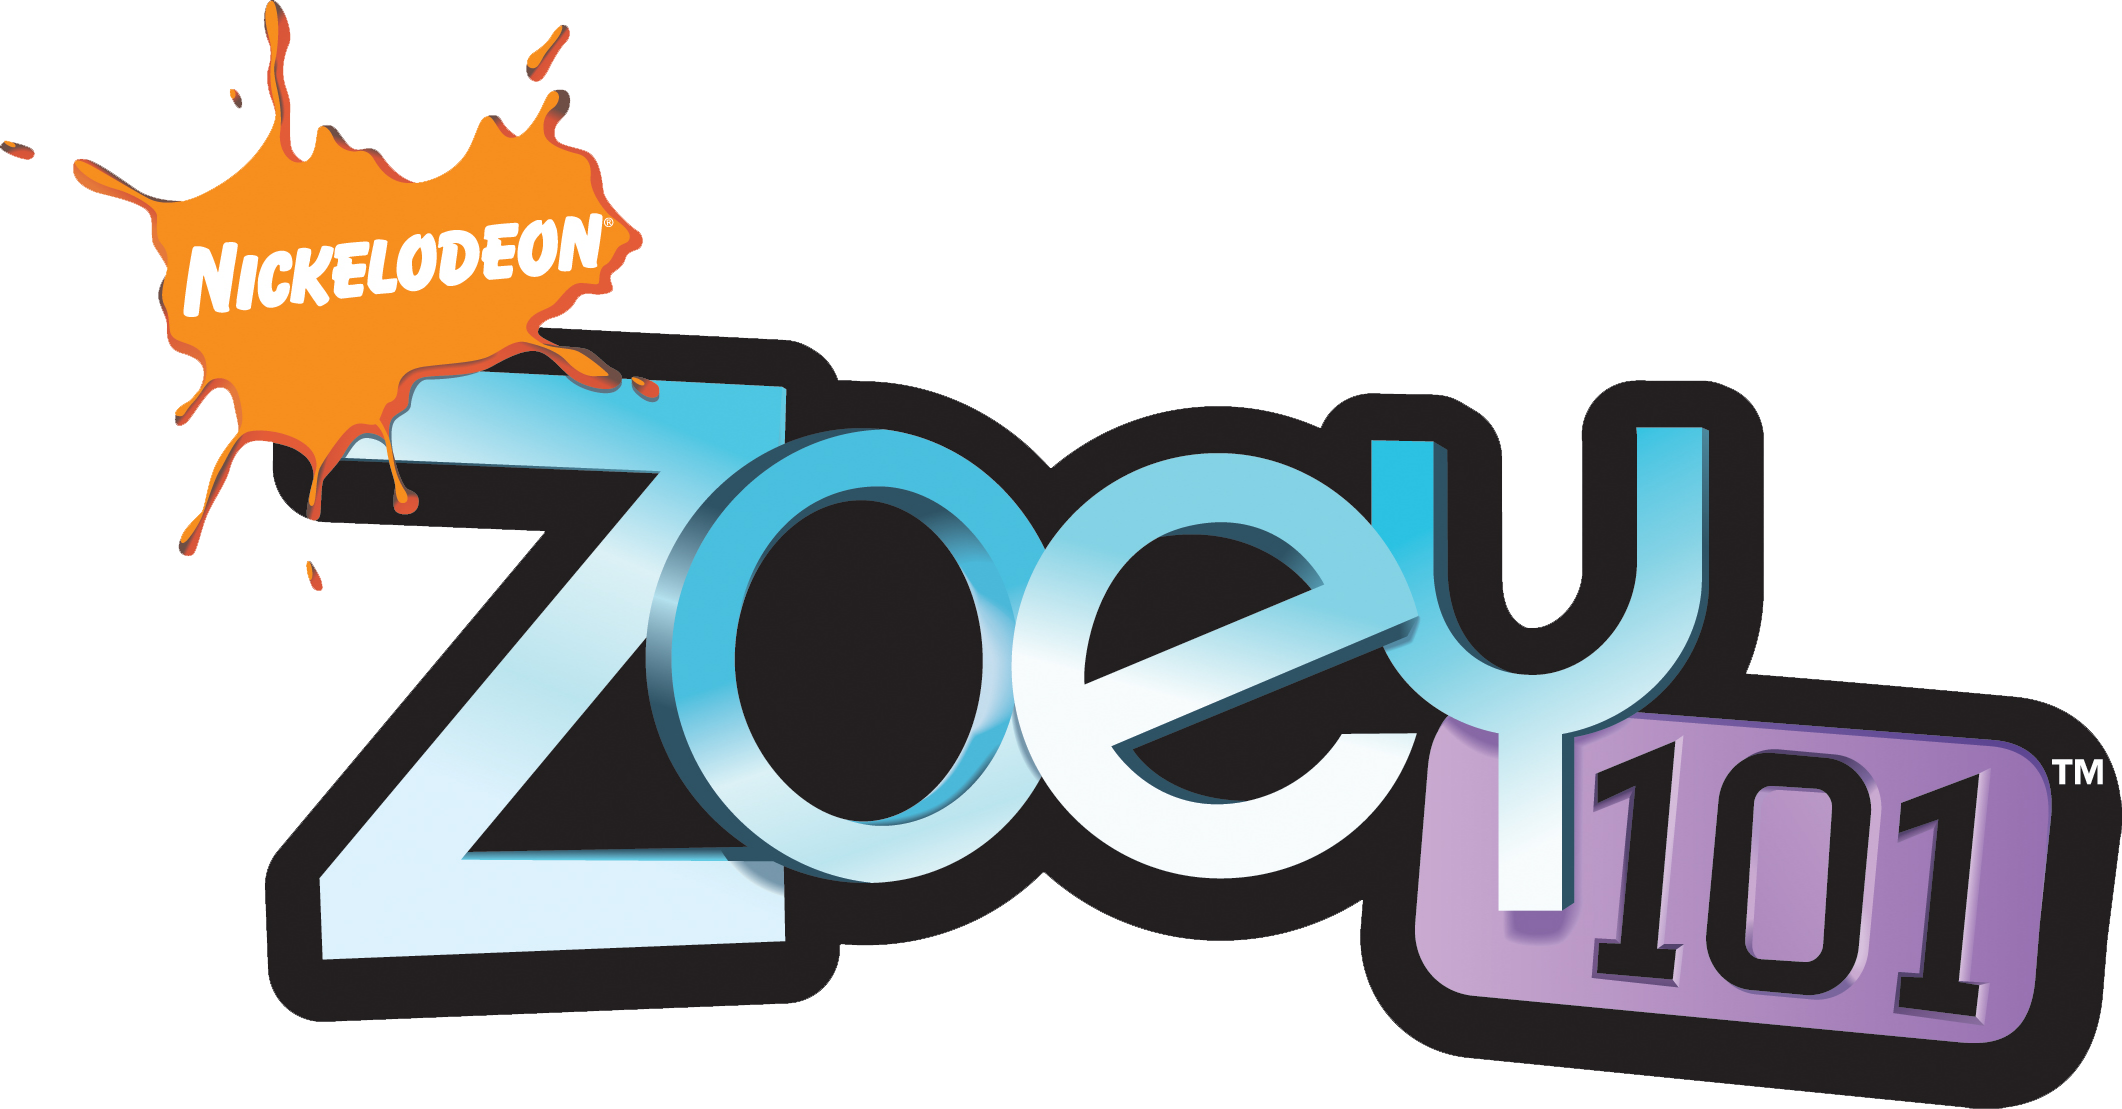 Zoey 101 Logo - Nickelodeon Zoey 101 Logo Clipart - Large Size Png Image .....